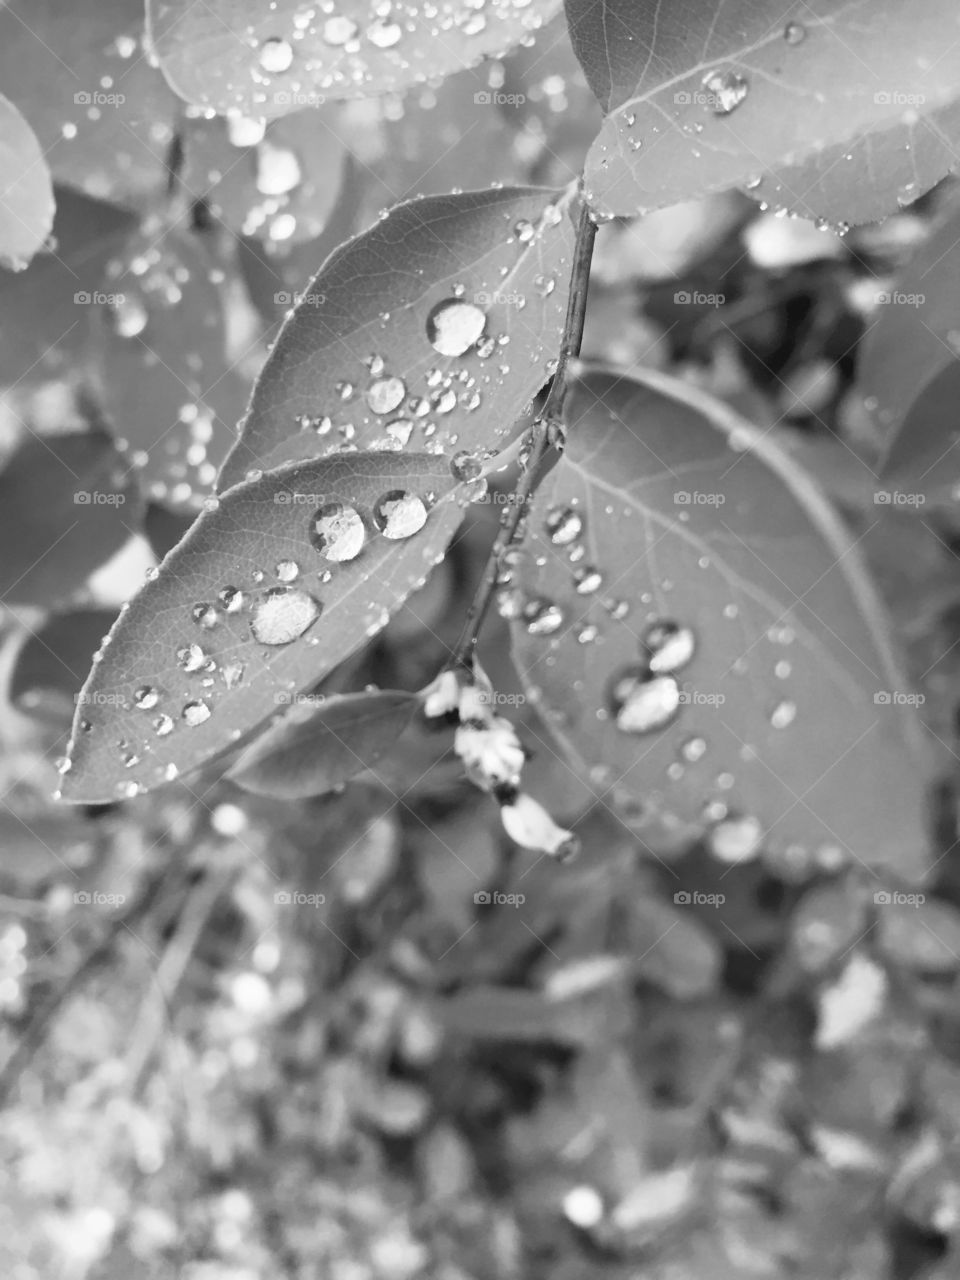 Waterdrops on leaves in close up